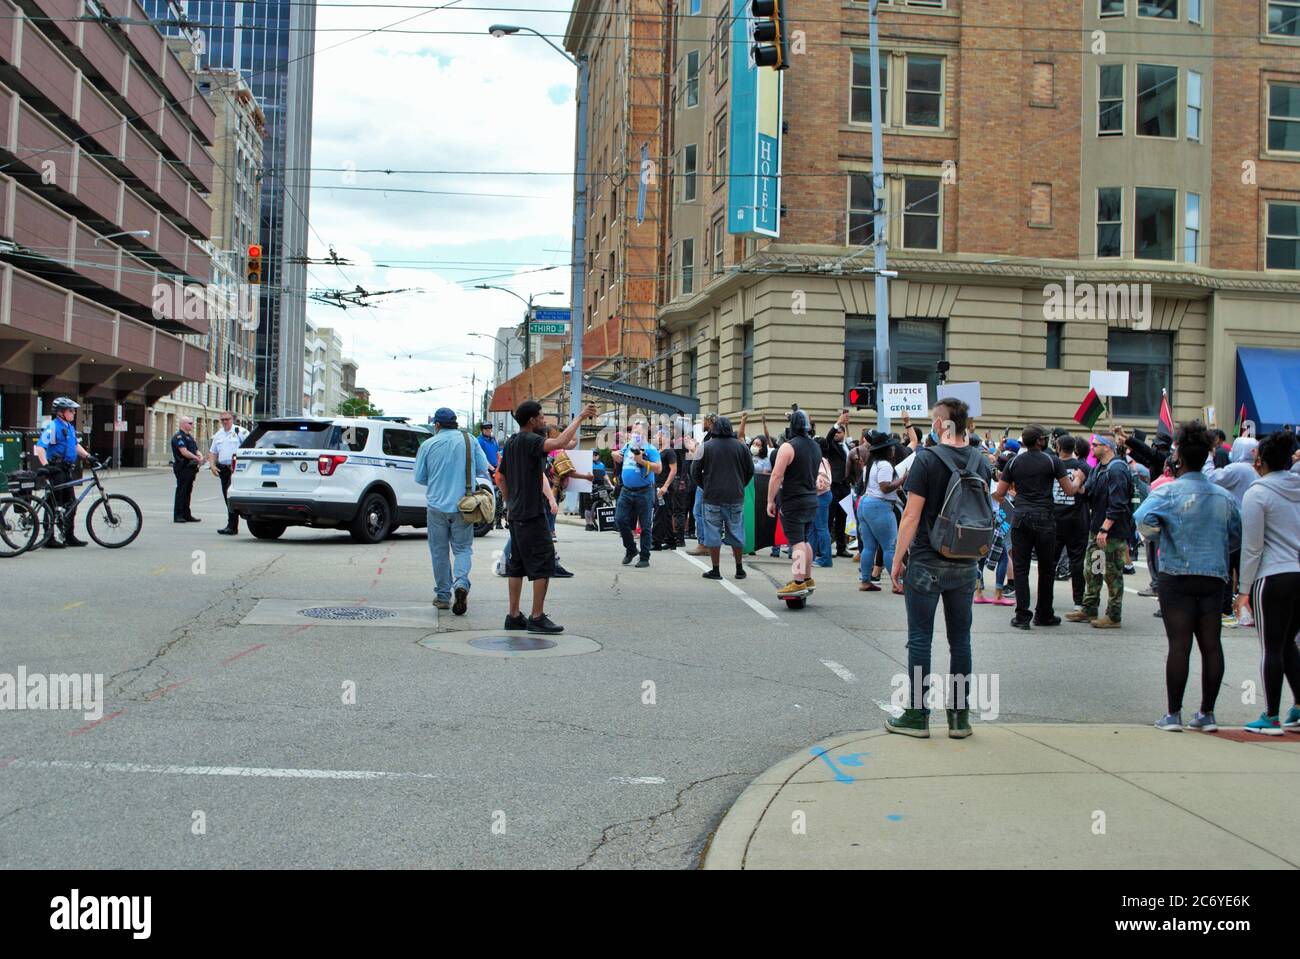 Dayton, Ohio, United States 05/30/2020 protesters at a black lives matter rally marching down the street holding signs and wearing masks Stock Photo